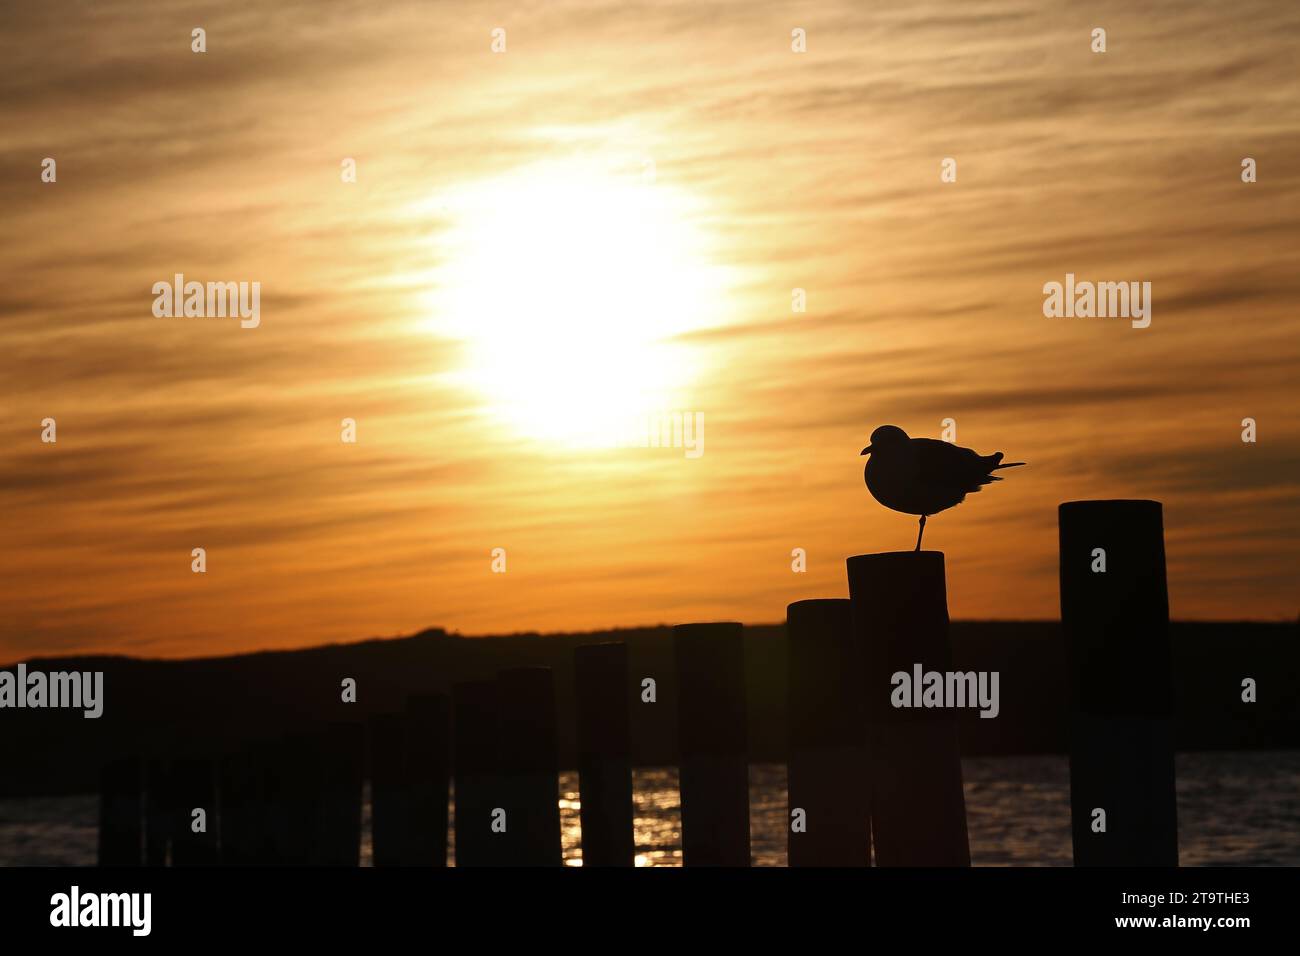 A silhouette of a seagull standing on one leg as the sun sets in Langebaan, South Africa. Stock Photo